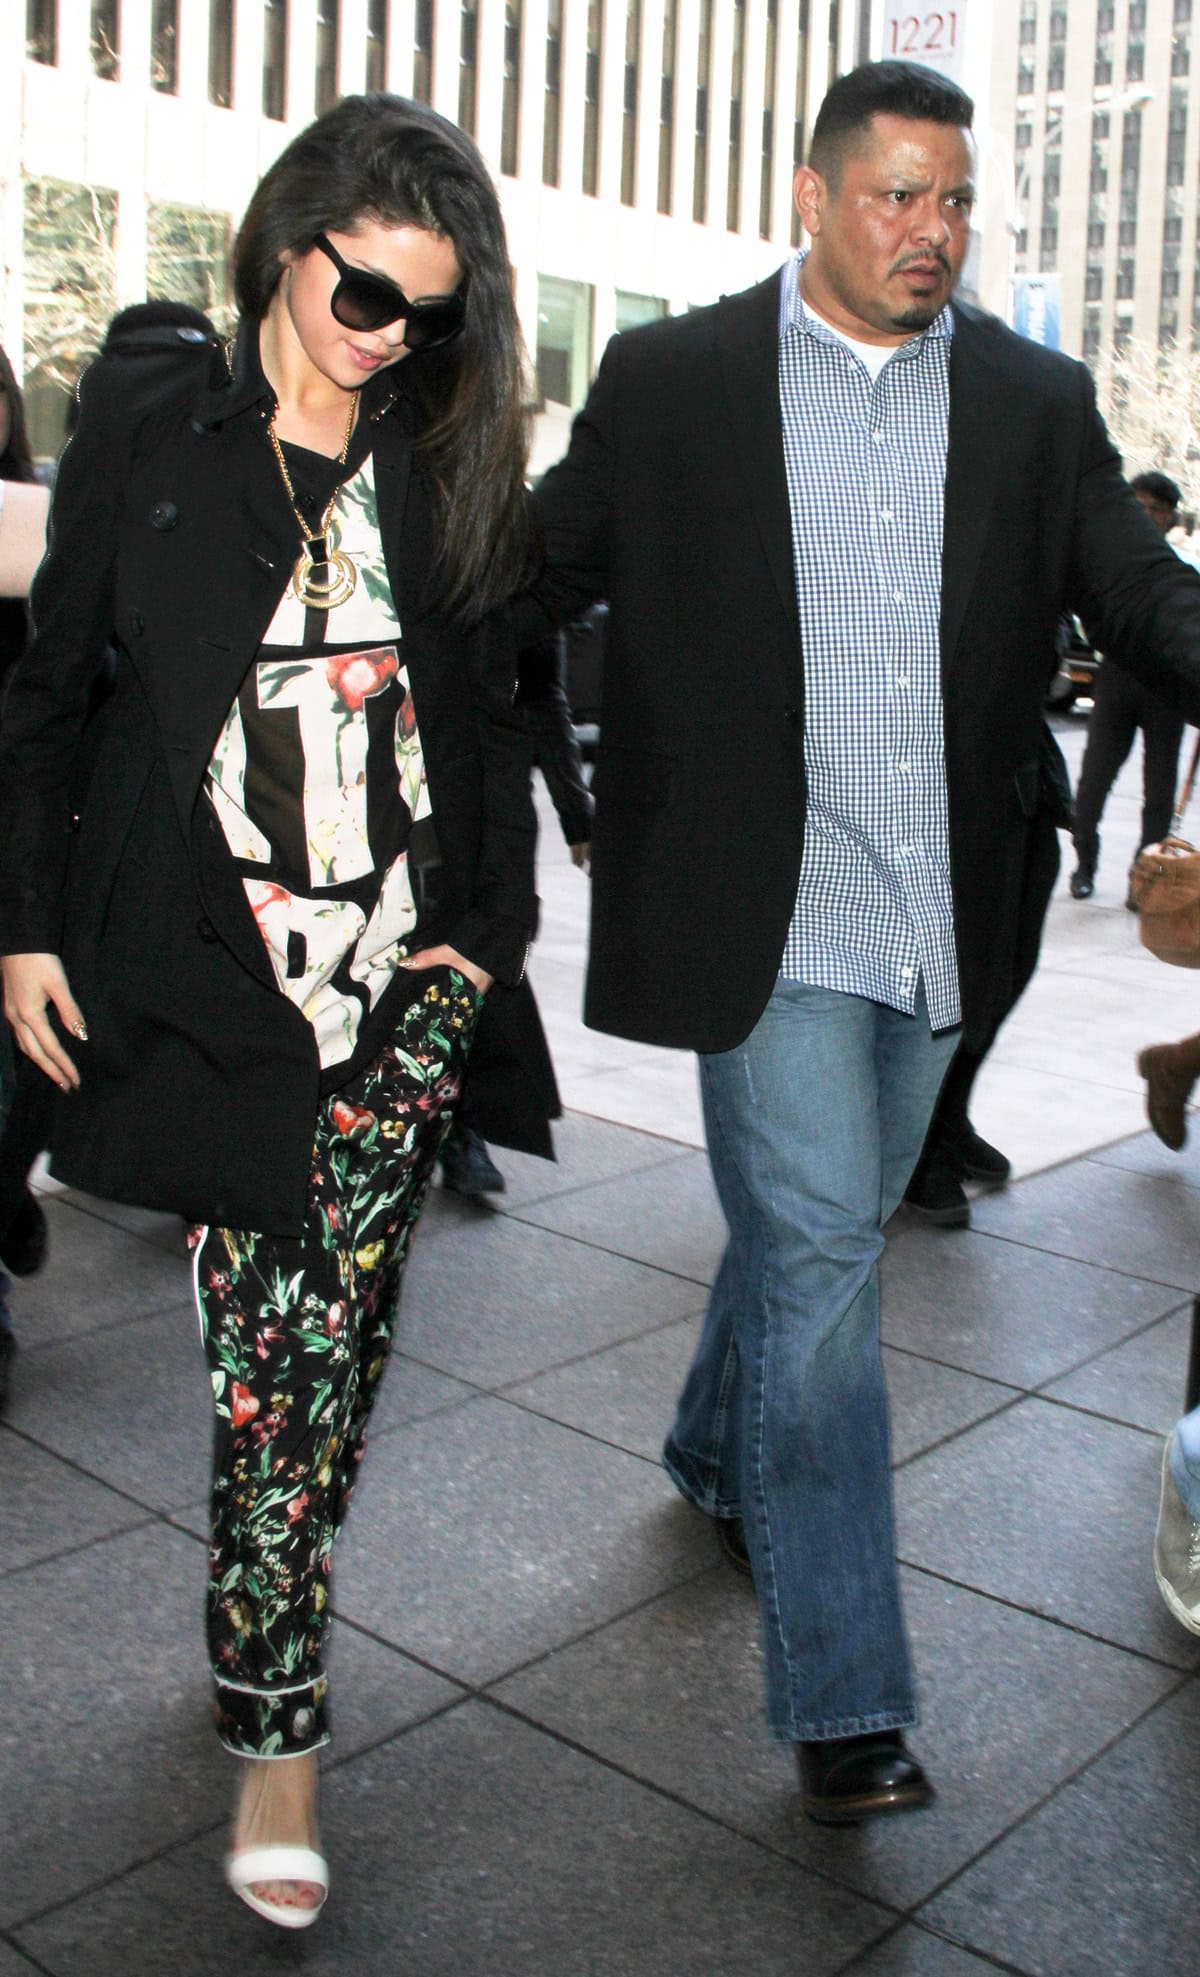 Selena Gomez embraced a relaxed, pajama-inspired ensemble featuring a 3.1 Phillip Lim silk chiffon floral tank and matching trousers, complemented by Bionda Castana 'Elisabetta' sandals while promoting her new single in New York City on April 24, 2013